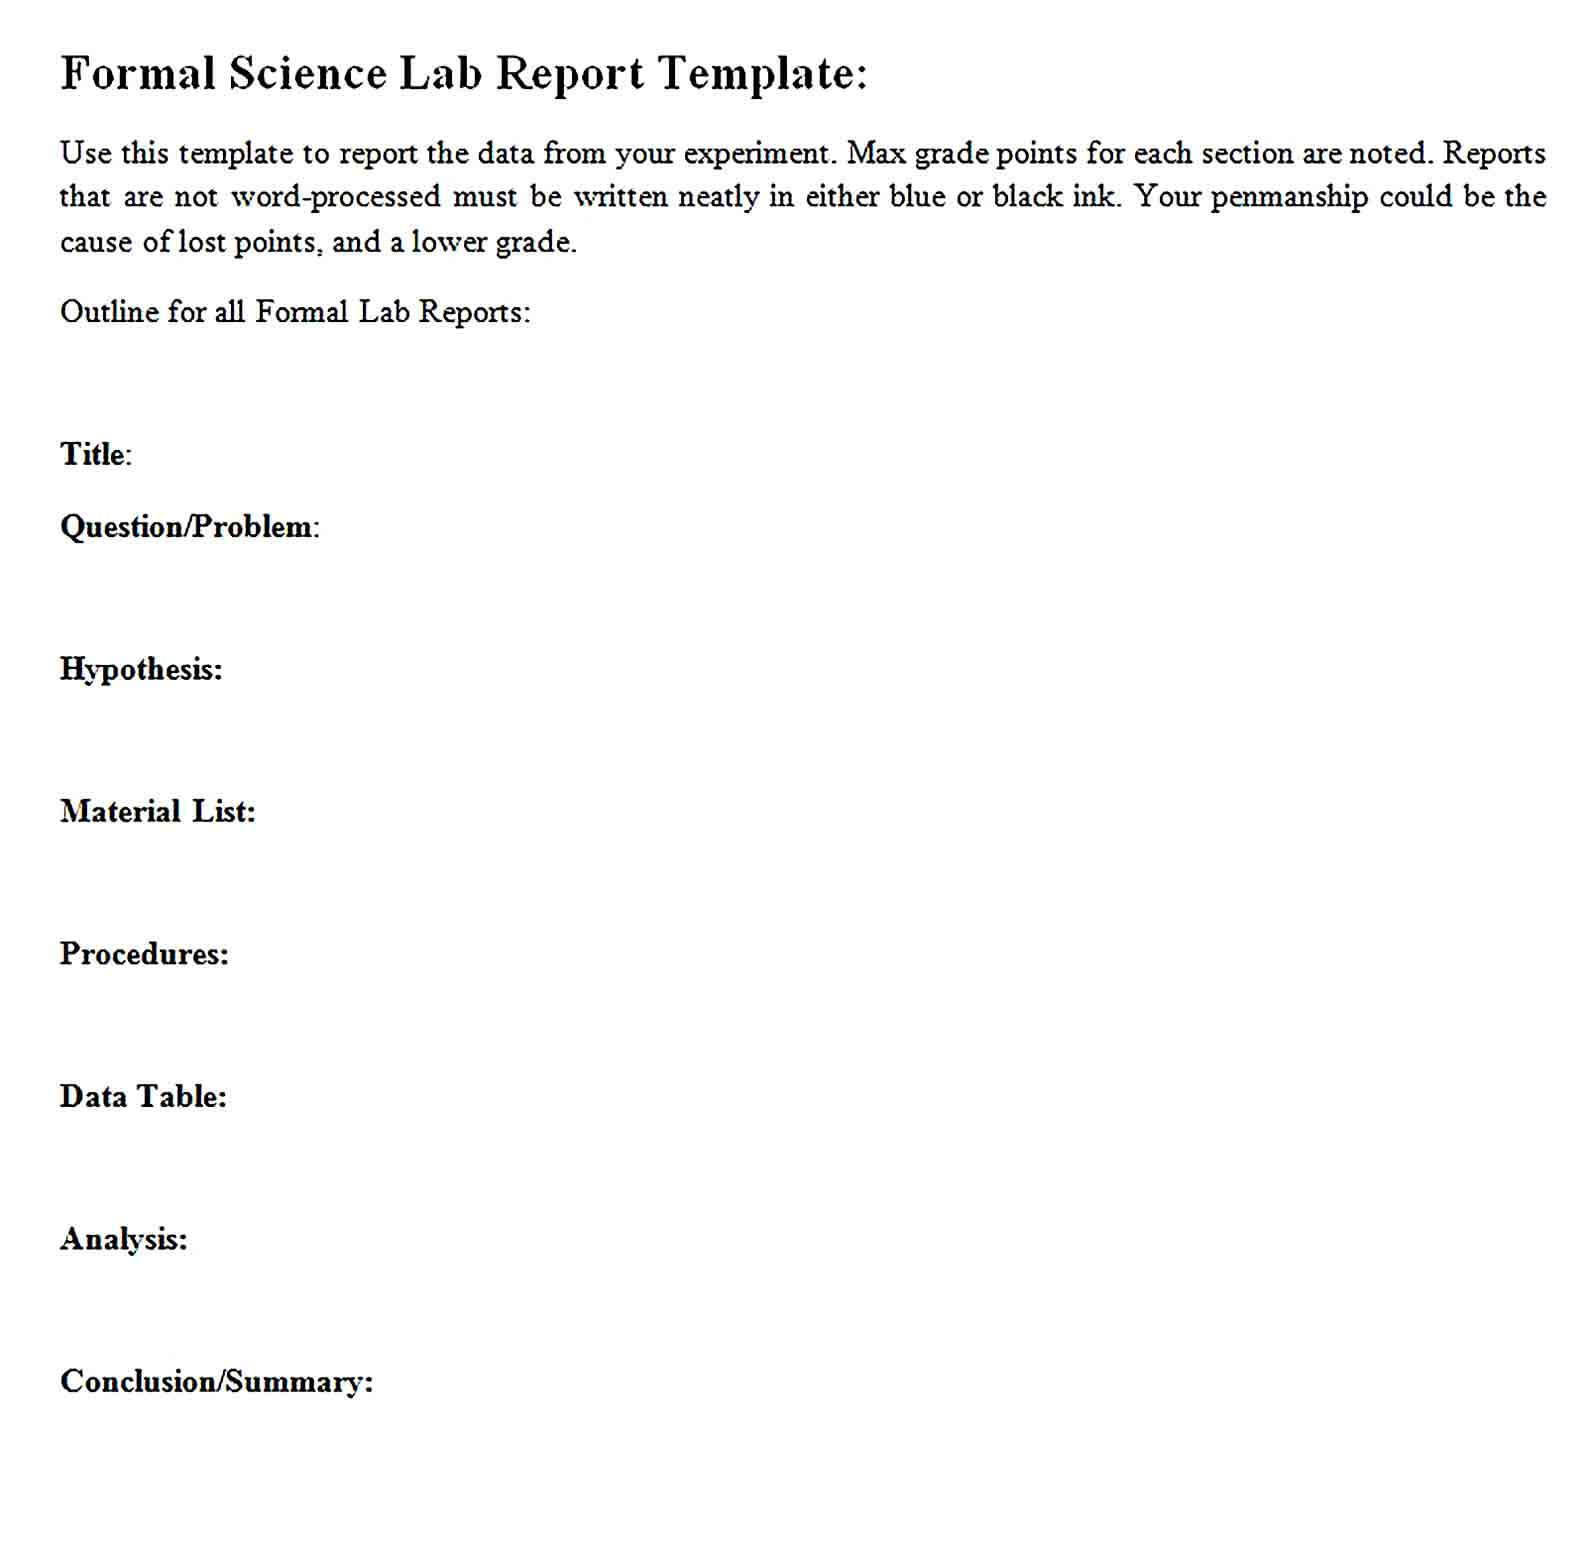 Sample Formal Science Lab Report Template